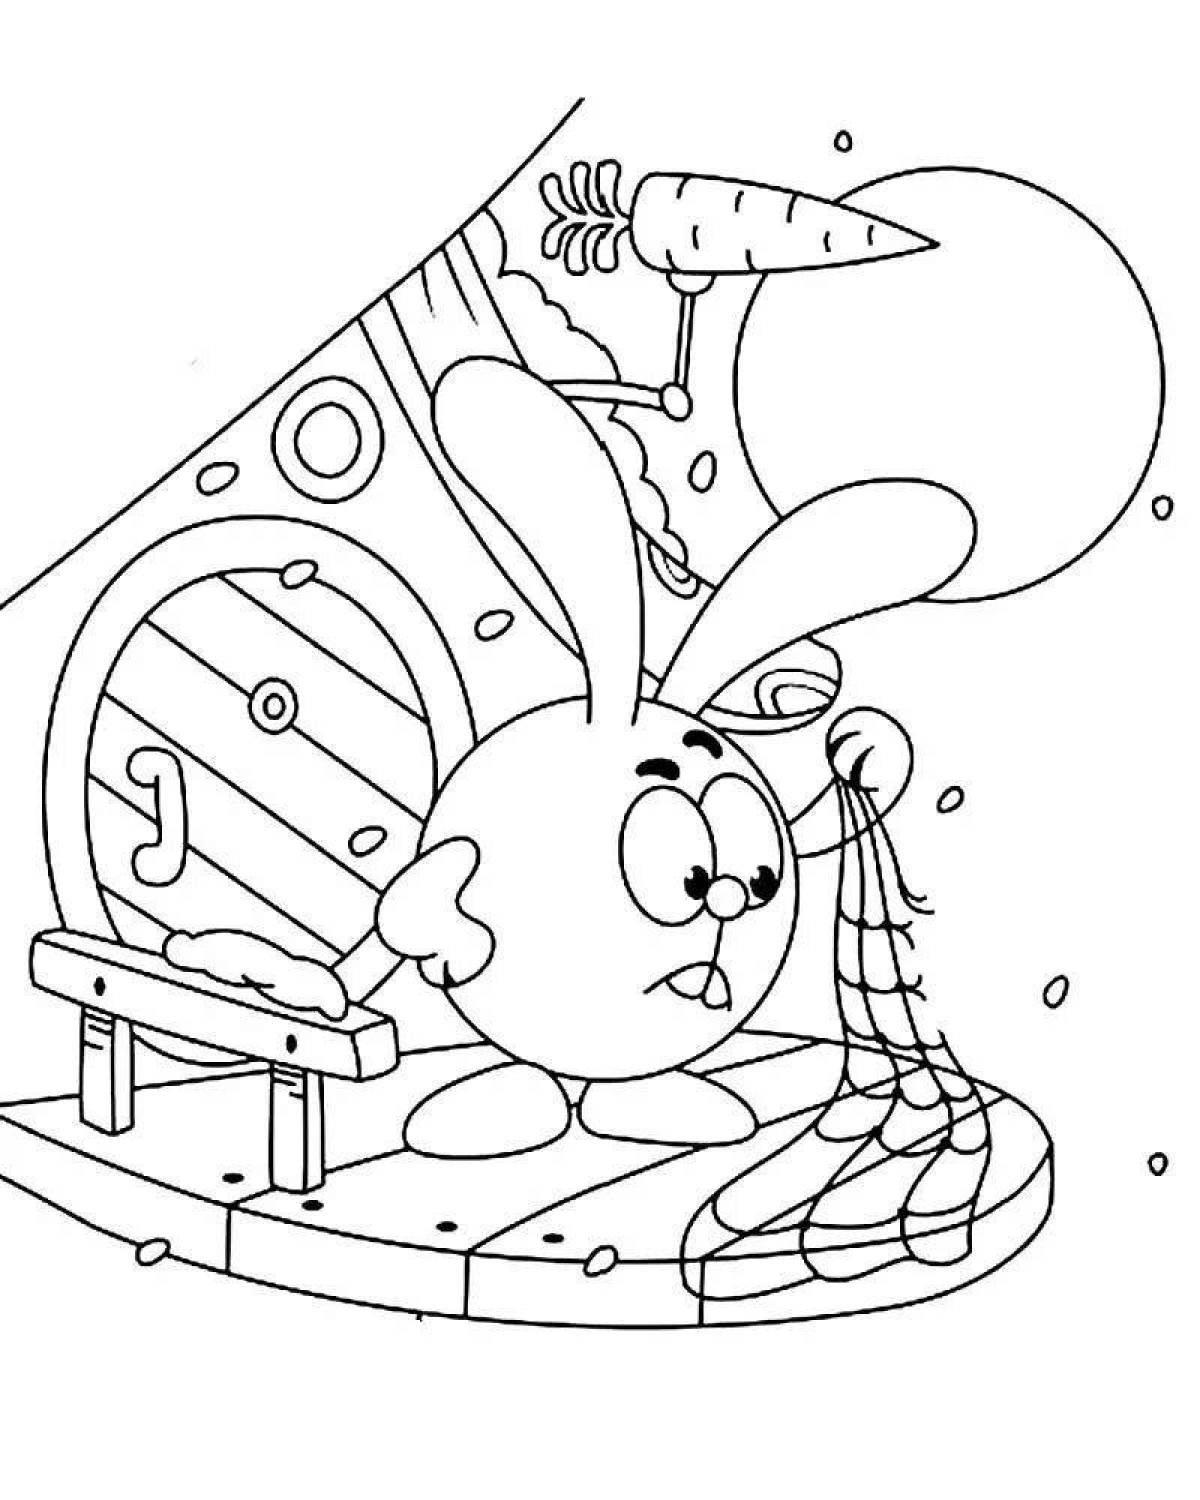 Collapsing coloring page with splashes of color